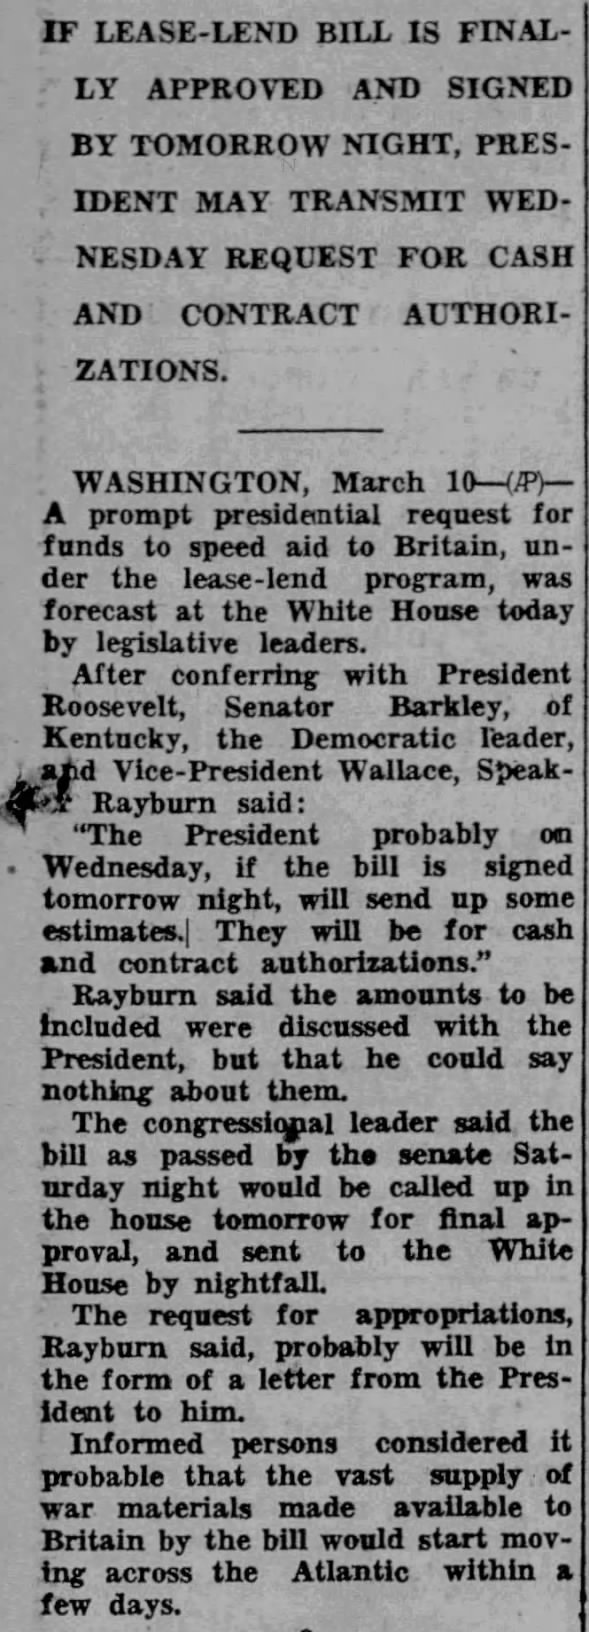 ROOSEVELT PREPARES TO REQUEST APPROPRIATIONS TO FINANCE BRITISH AID